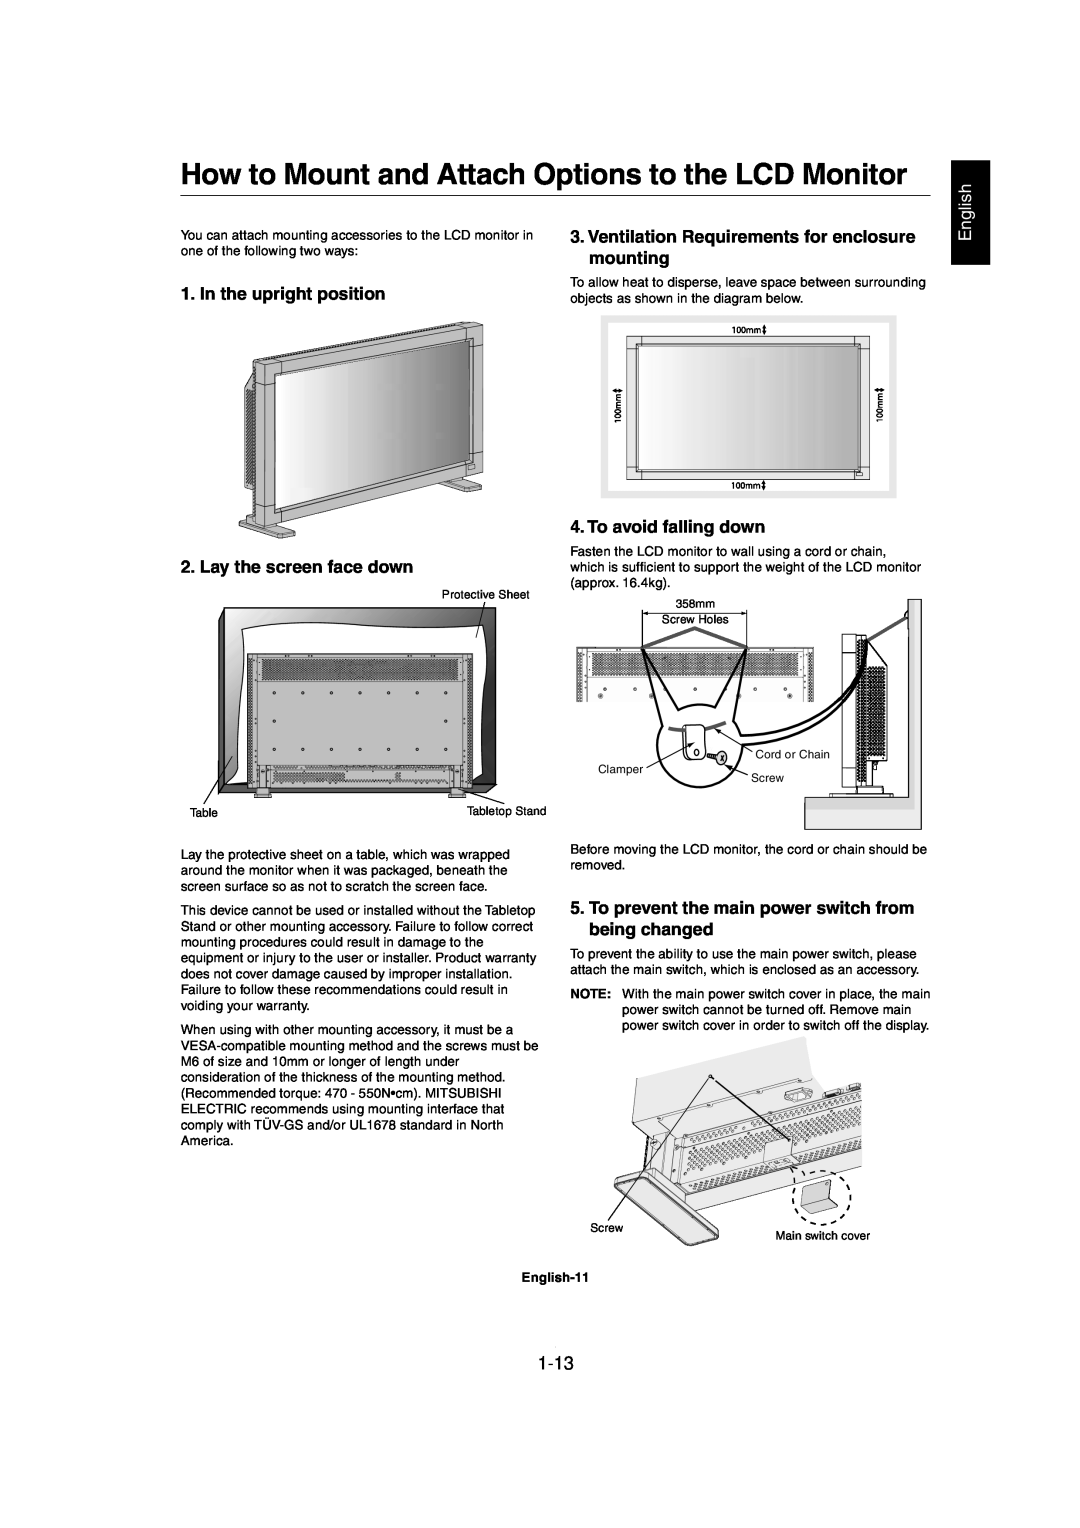 Mitsubishi Electronics MDT321S How to Mount and Attach Options to the LCD Monitor, mounting, In the upright position, 1-13 